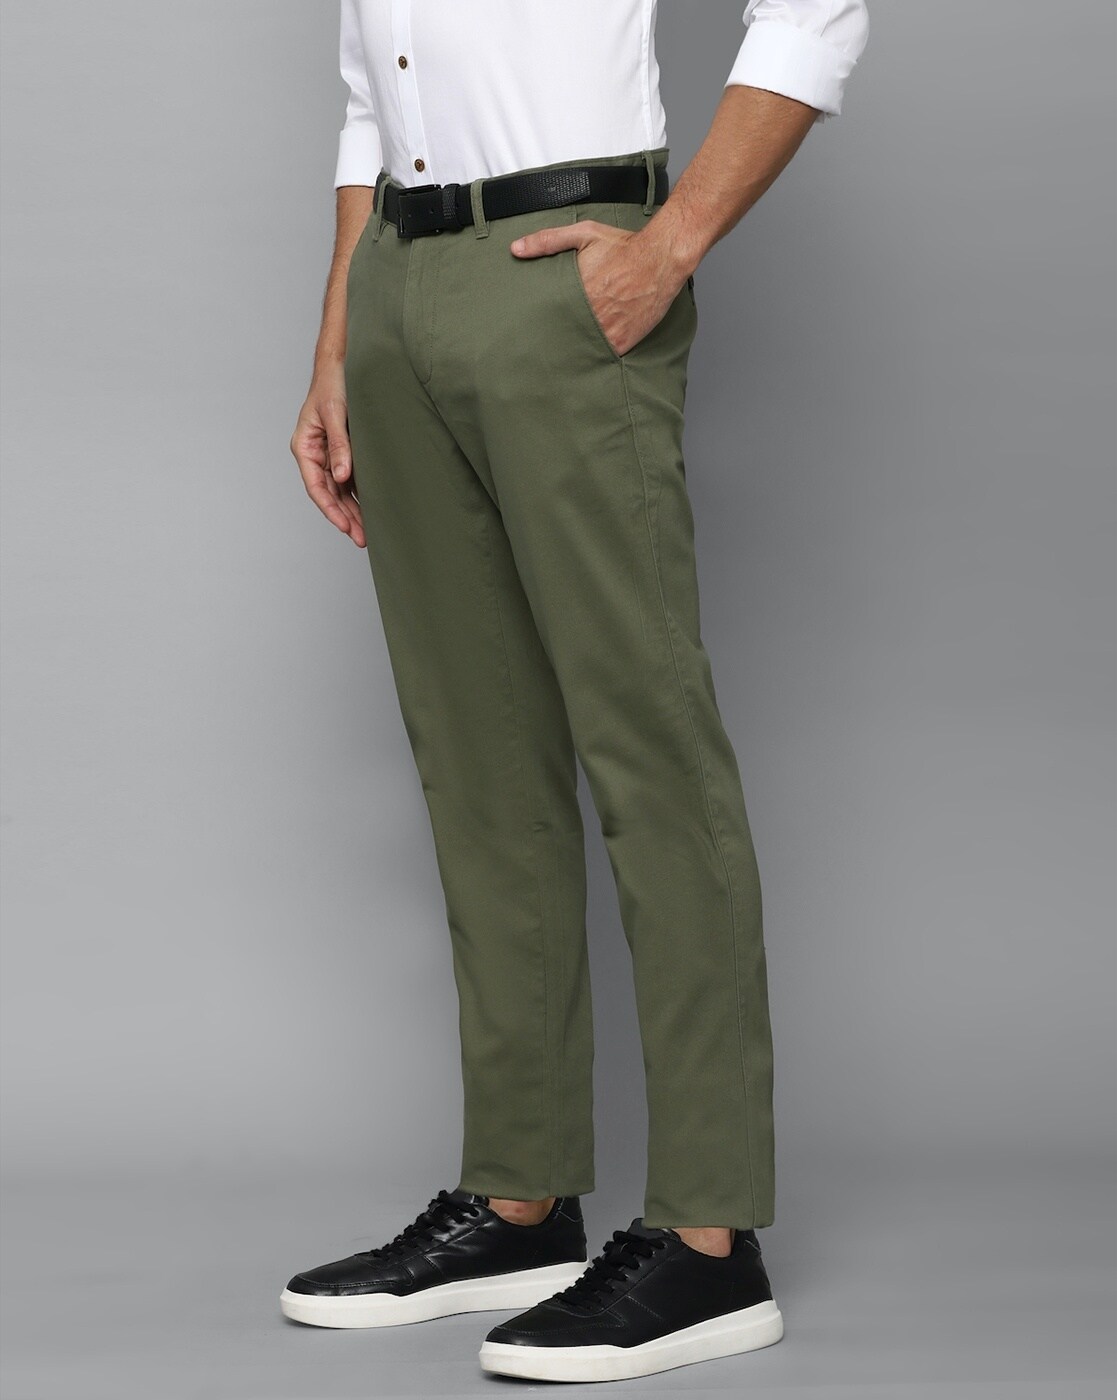 Buy The Indian Garage Co Men Olive Green Solid Chinos Trousers - Trousers  for Men 19674536 | Myntra